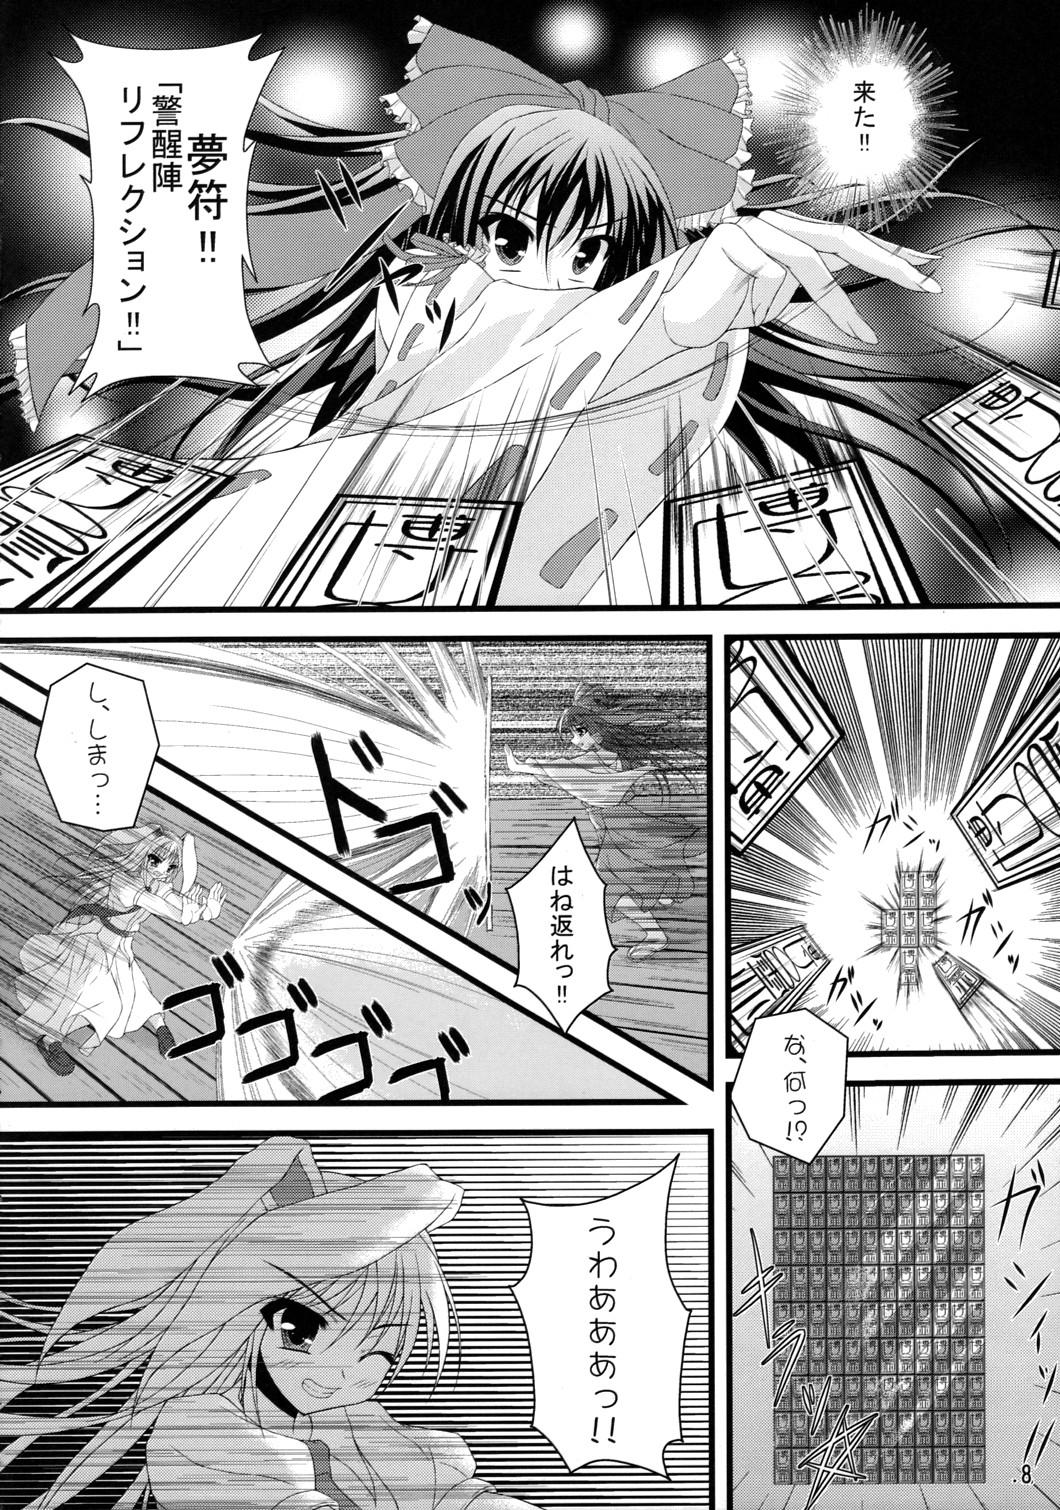 Shoplifter Tele-Mesmerism - Touhou project Groping - Page 7